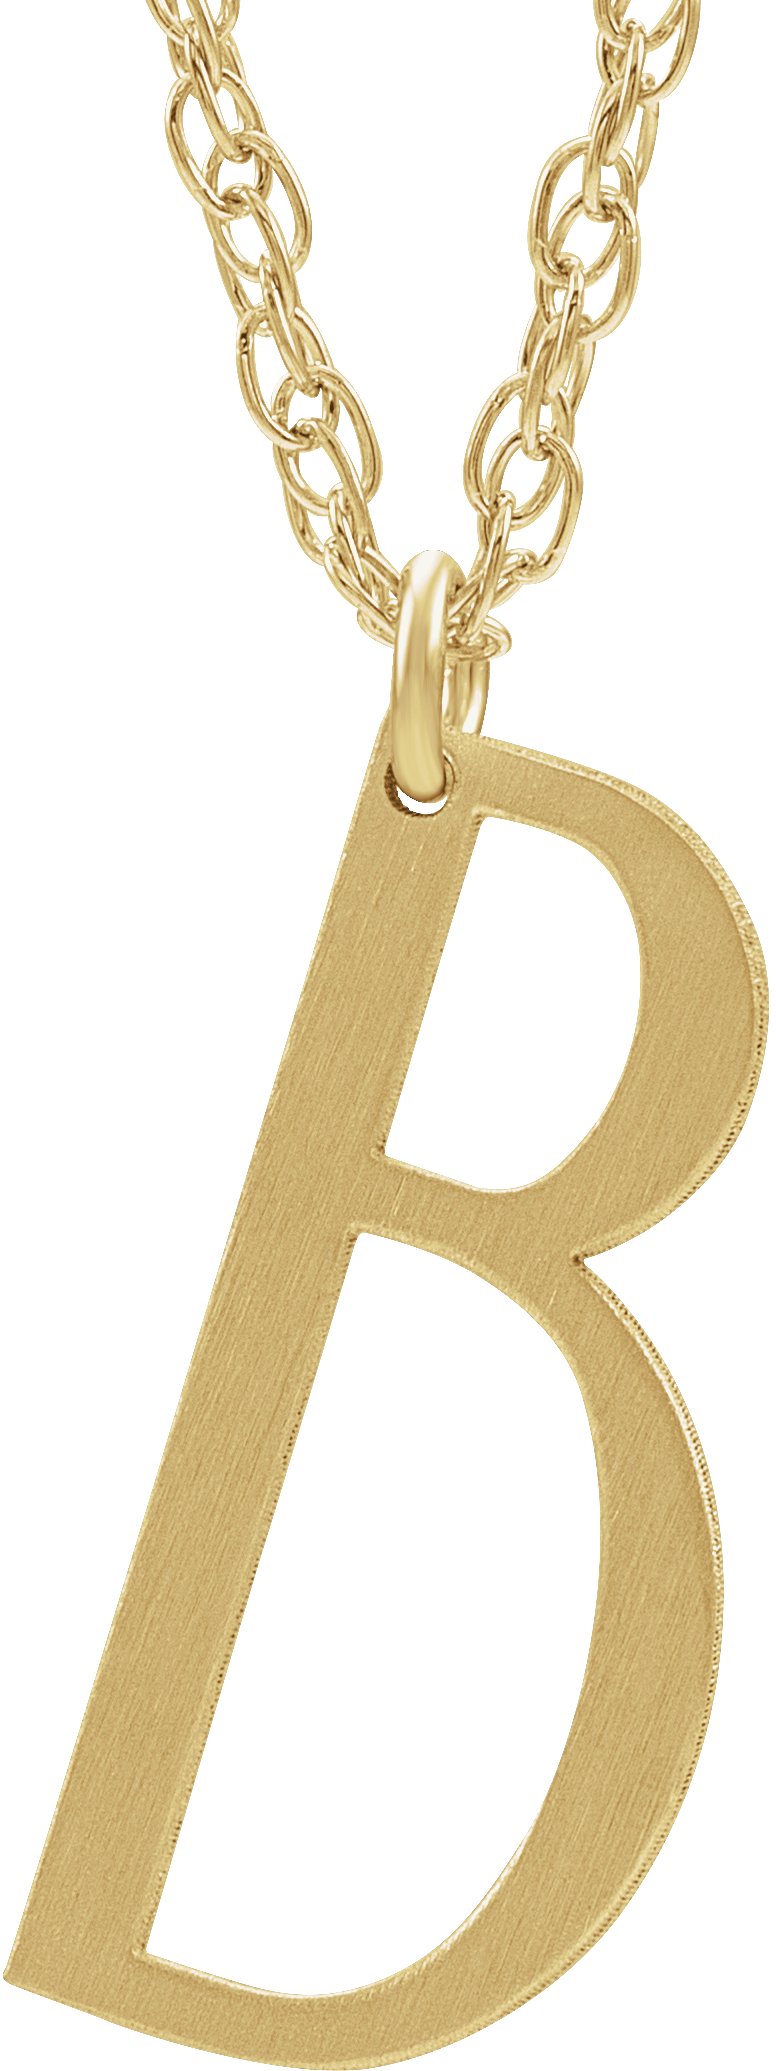 14K Yellow Gold-Plated Sterling Silver Block Initial B 16-18" Necklace with Brush Finish